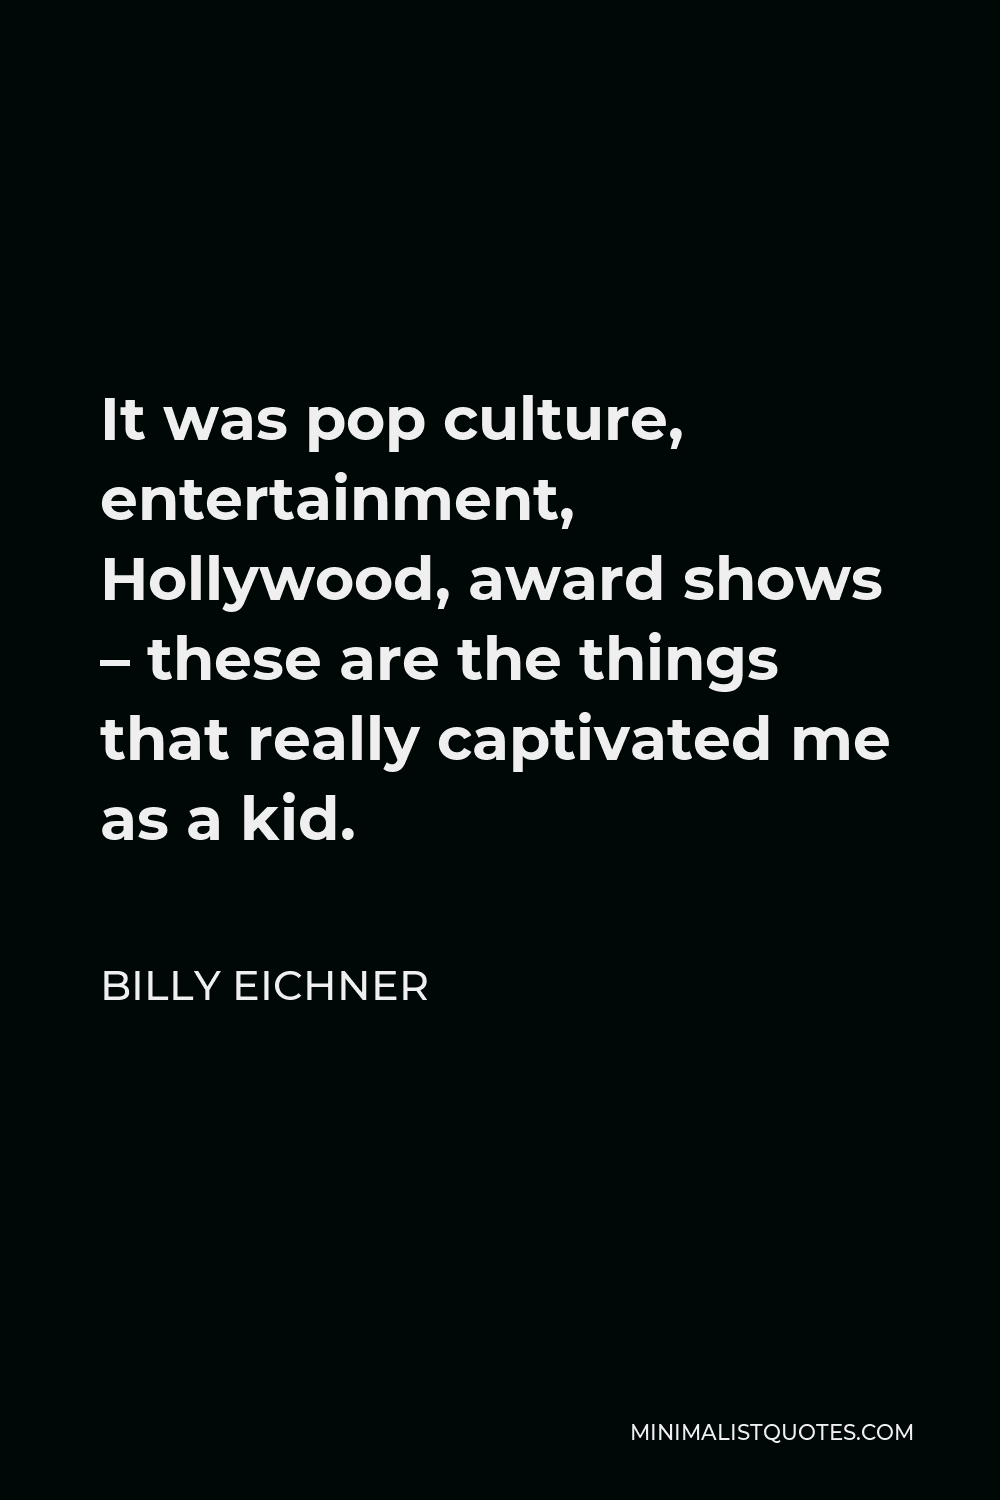 Billy Eichner Quote - It was pop culture, entertainment, Hollywood, award shows – these are the things that really captivated me as a kid.